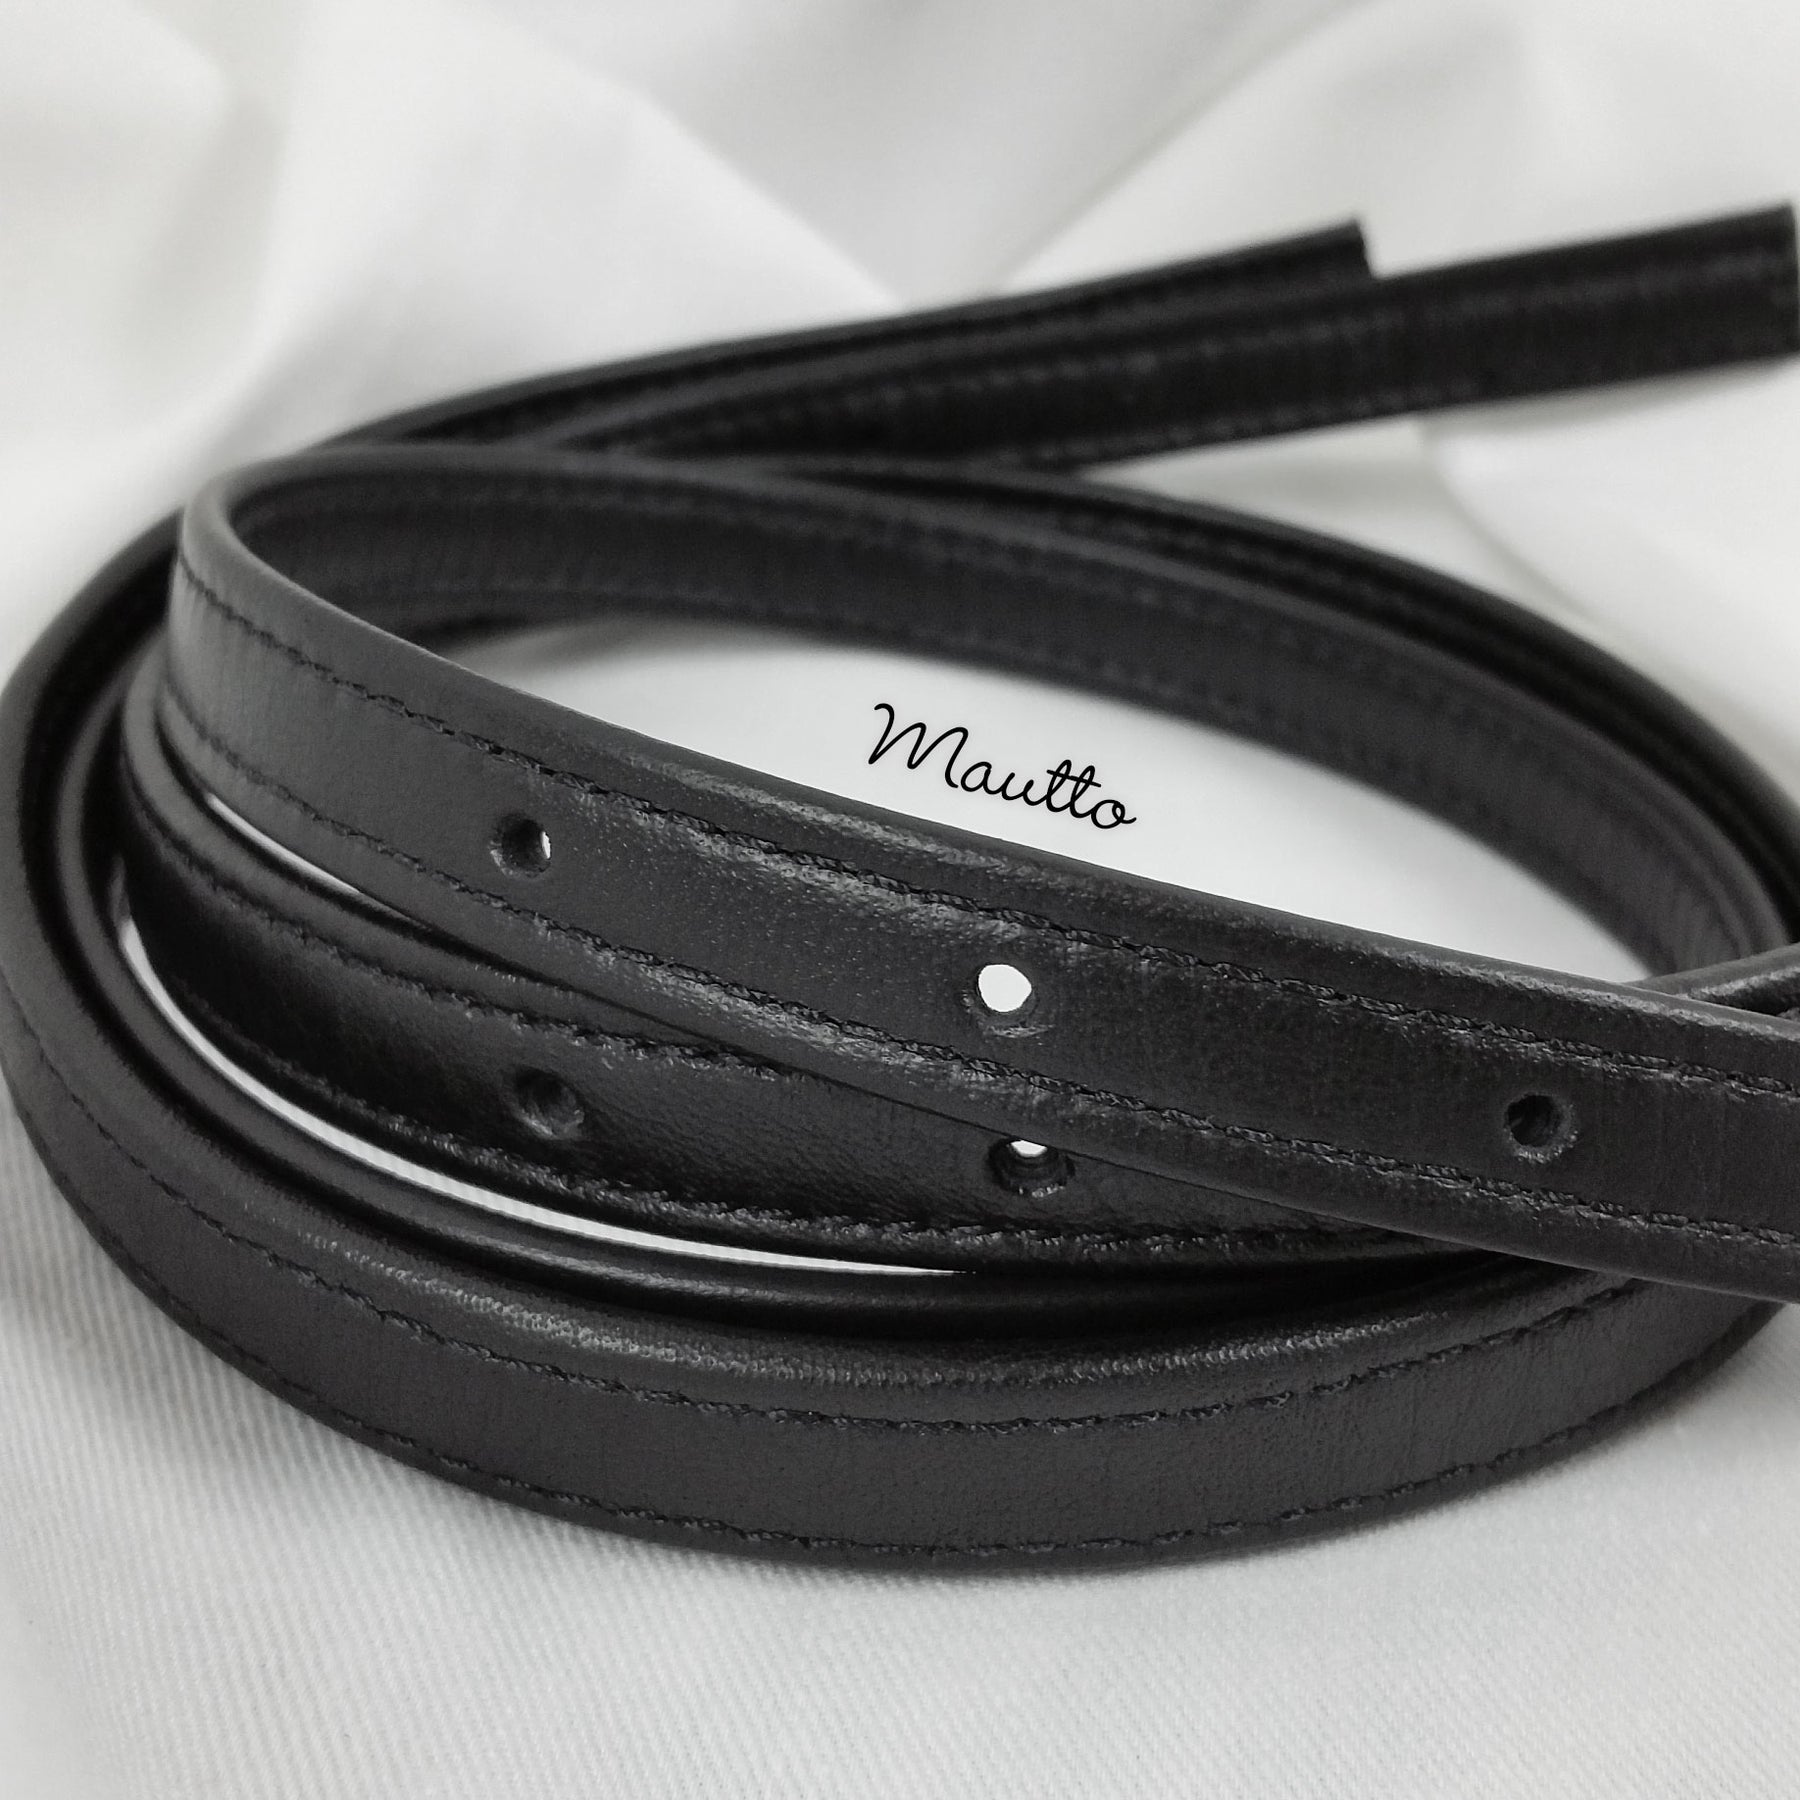 Replacement Leather Straps for MK Jet Set or Similar - 1/2 inch Wide Black Pebble Leather